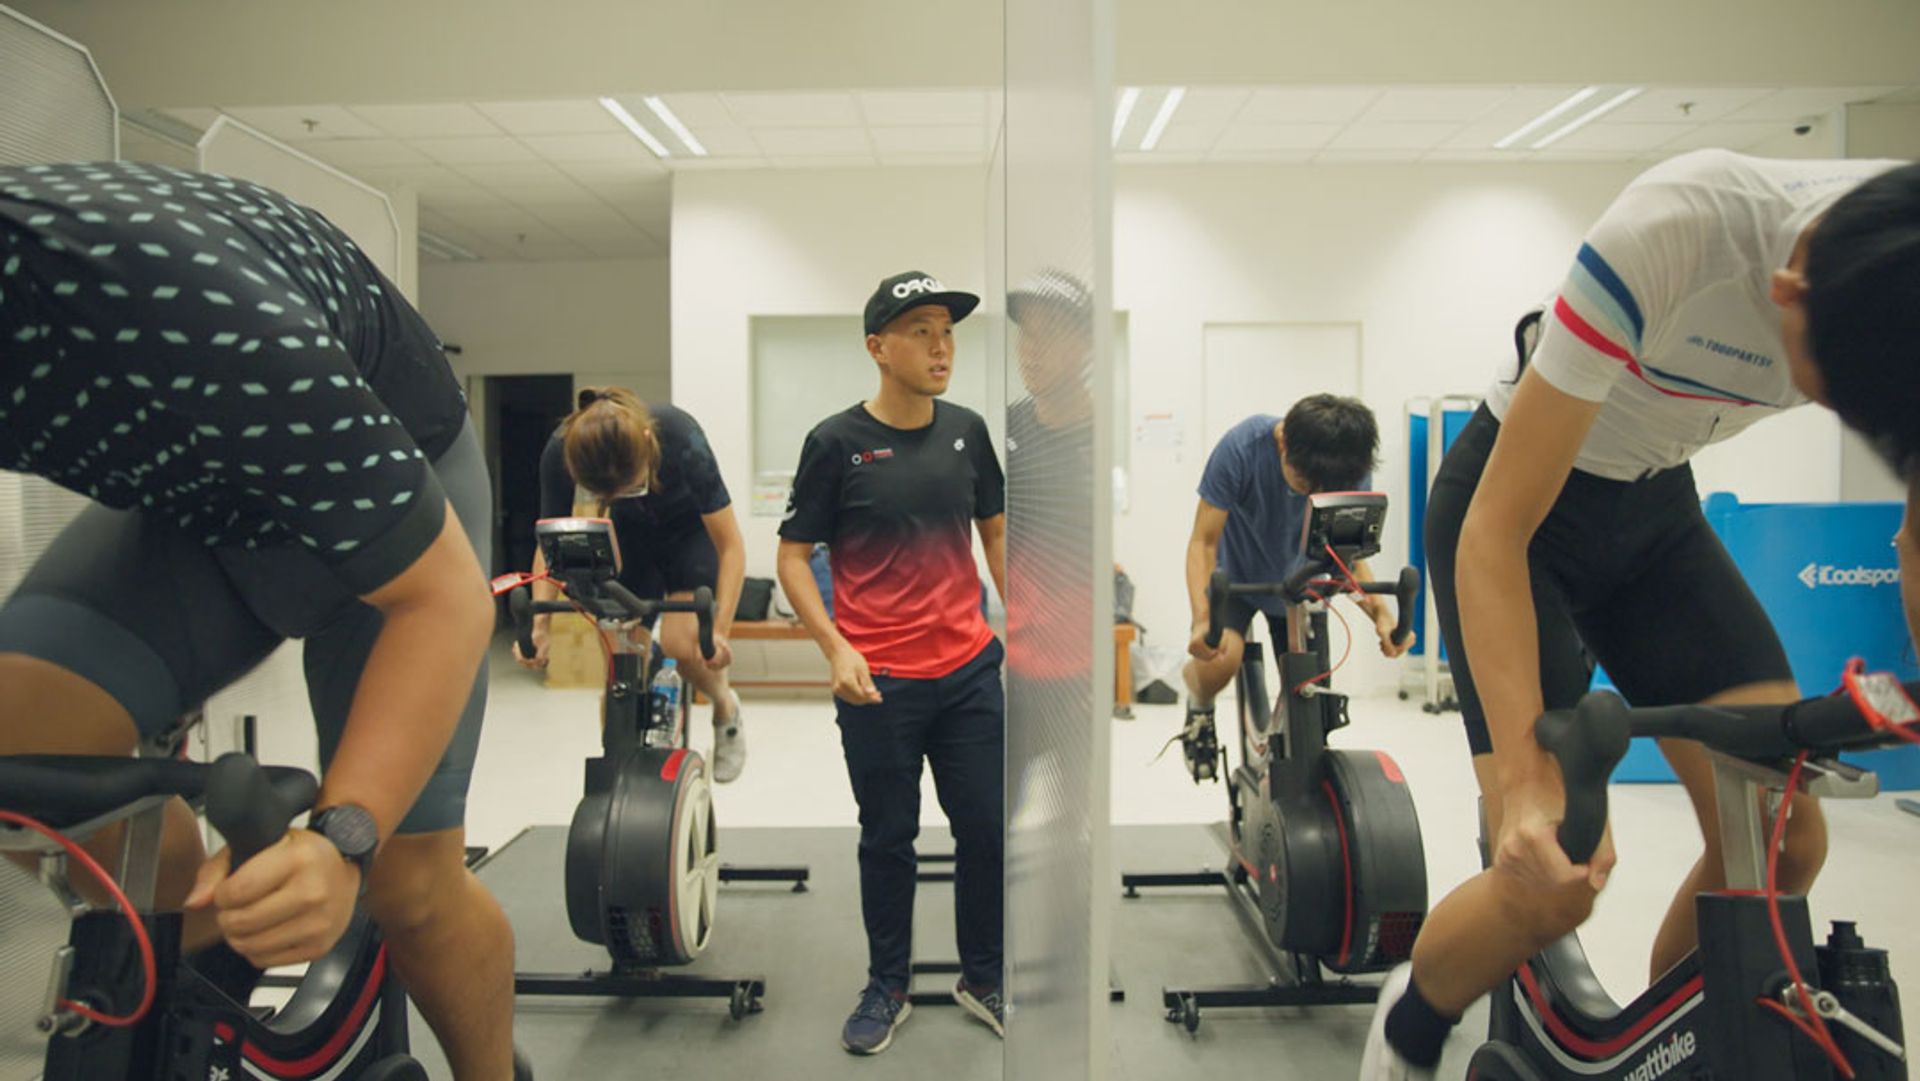 SEA Games gold medallist Calvin Sim in action at the Singapore Sport Institute, where he identifies talent to produce winning athletes.